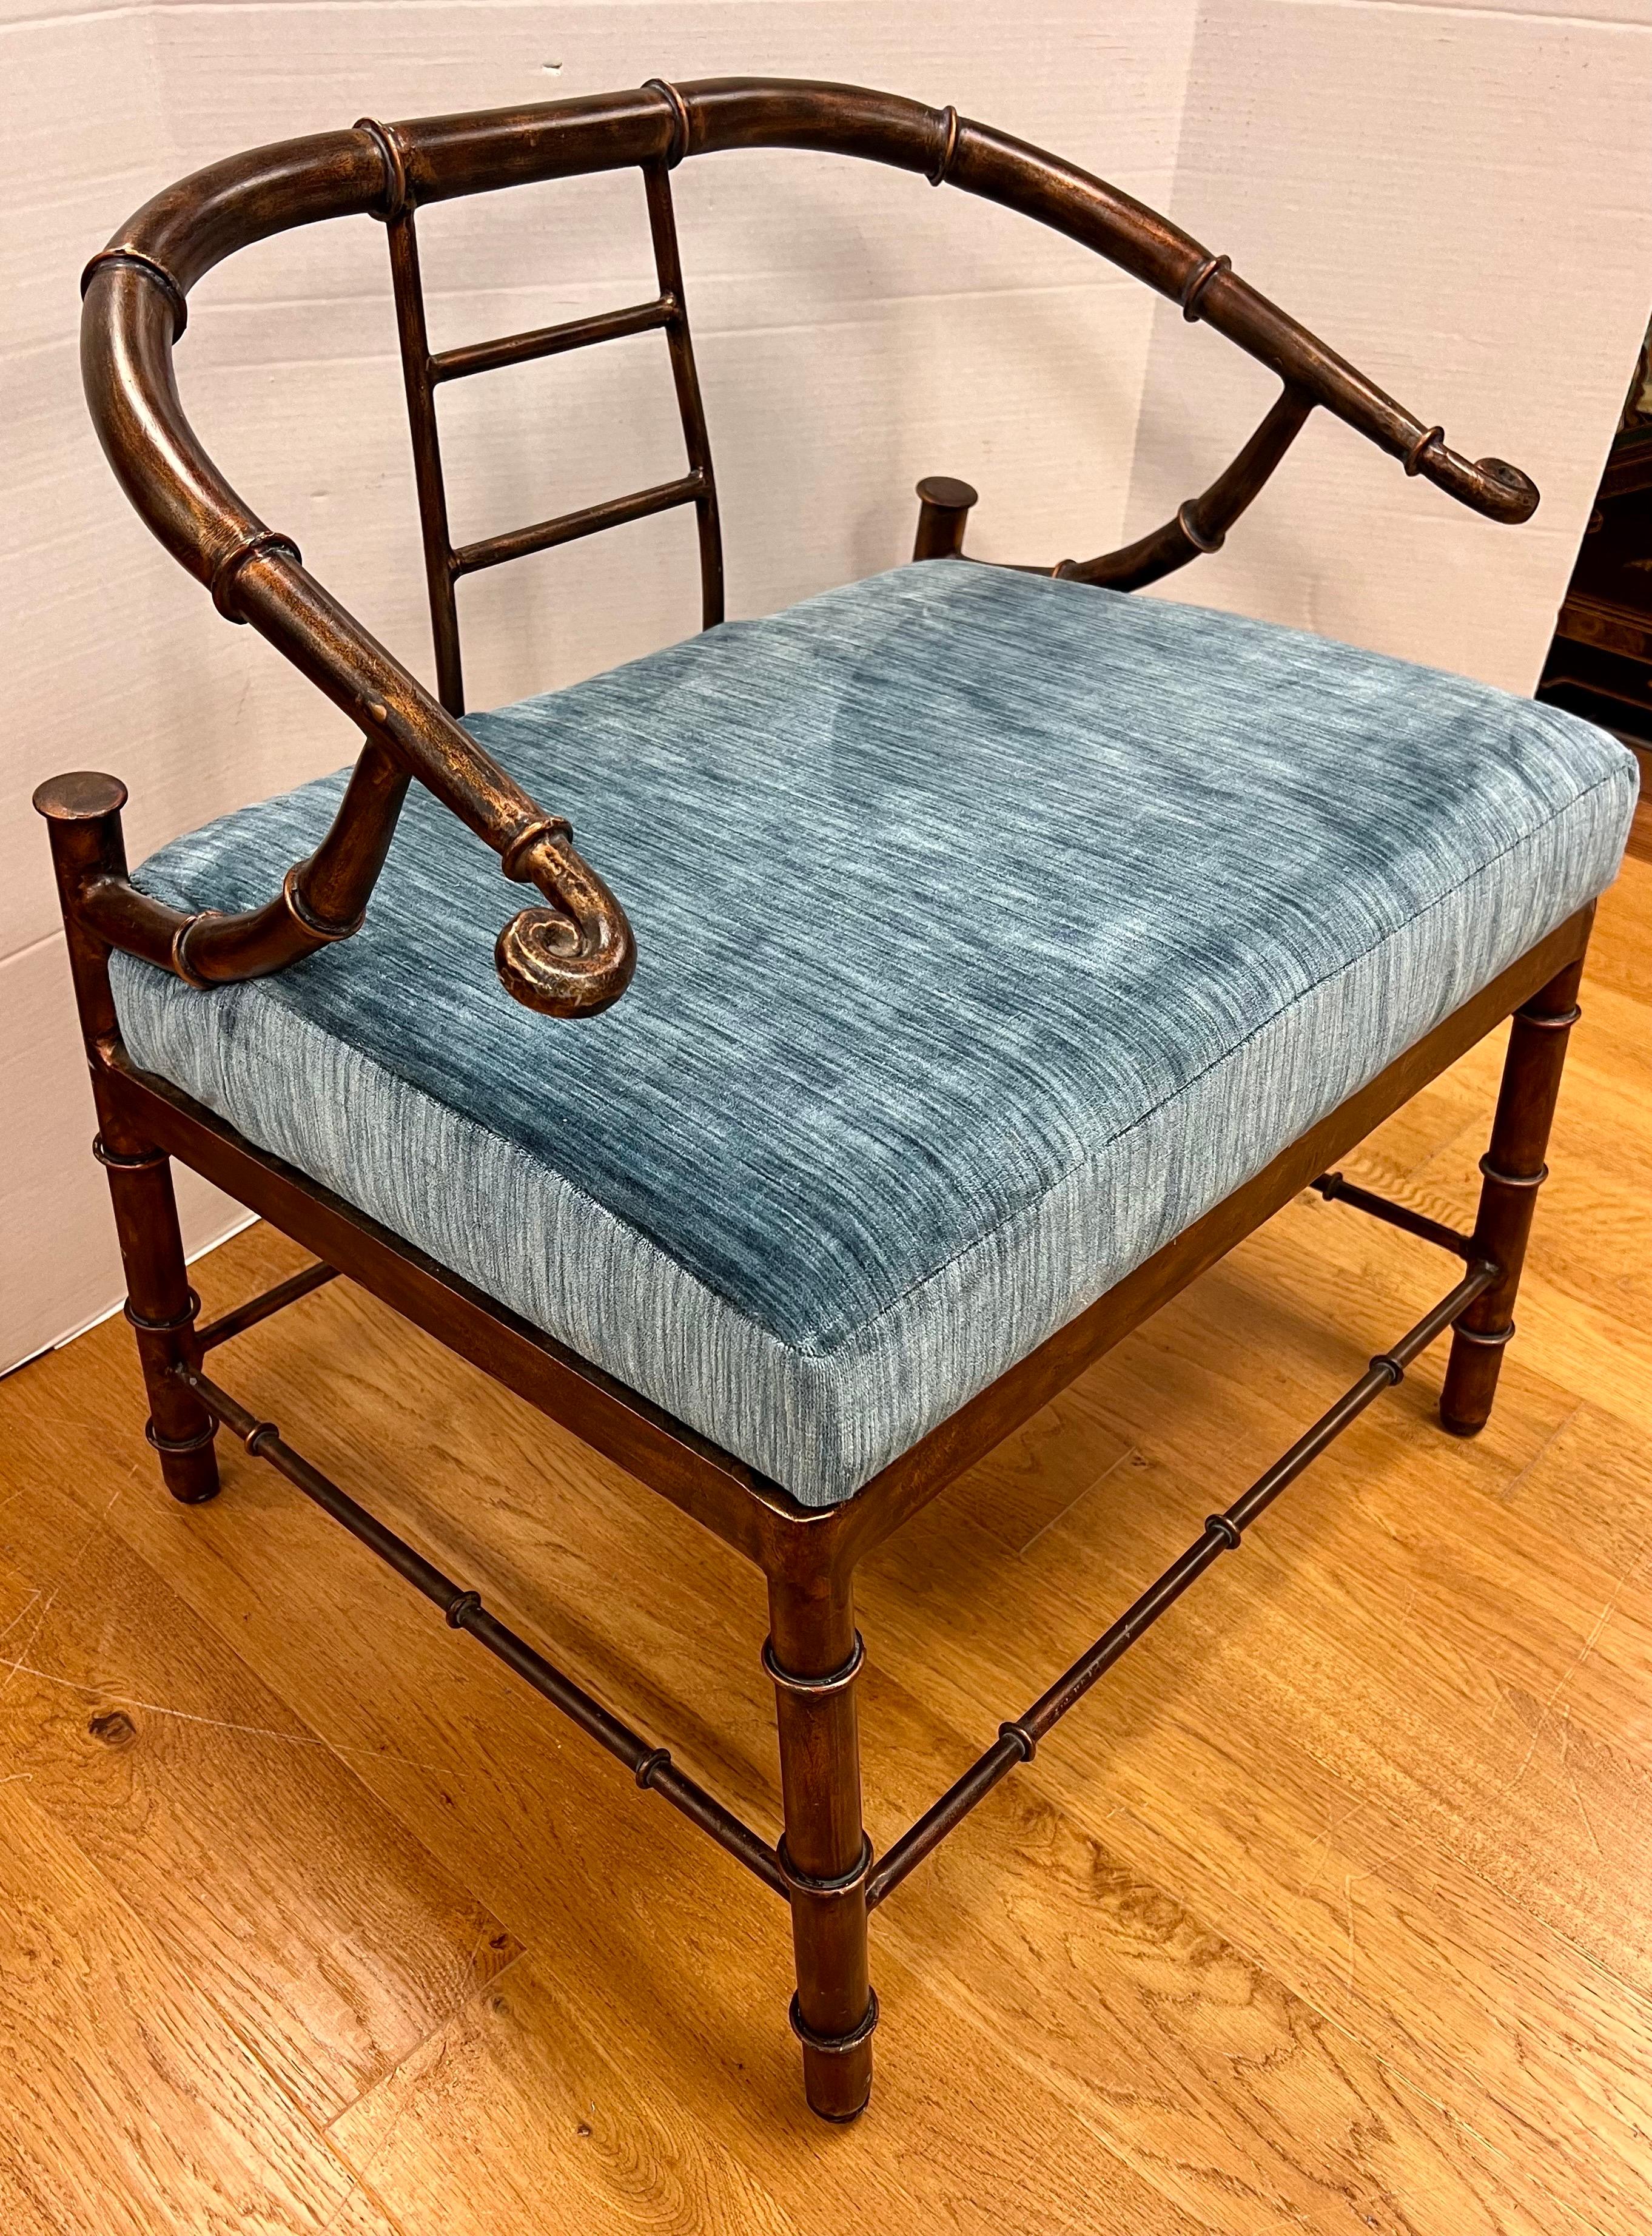 Asian design Mastercraft chinoiserie style lounge chair with bronze finish metal frame and vintage cushion. The curved brass arms and back are faux bamboo, with horizontally scrolled handrests. Legs are set at an angle, square in form, and linear in